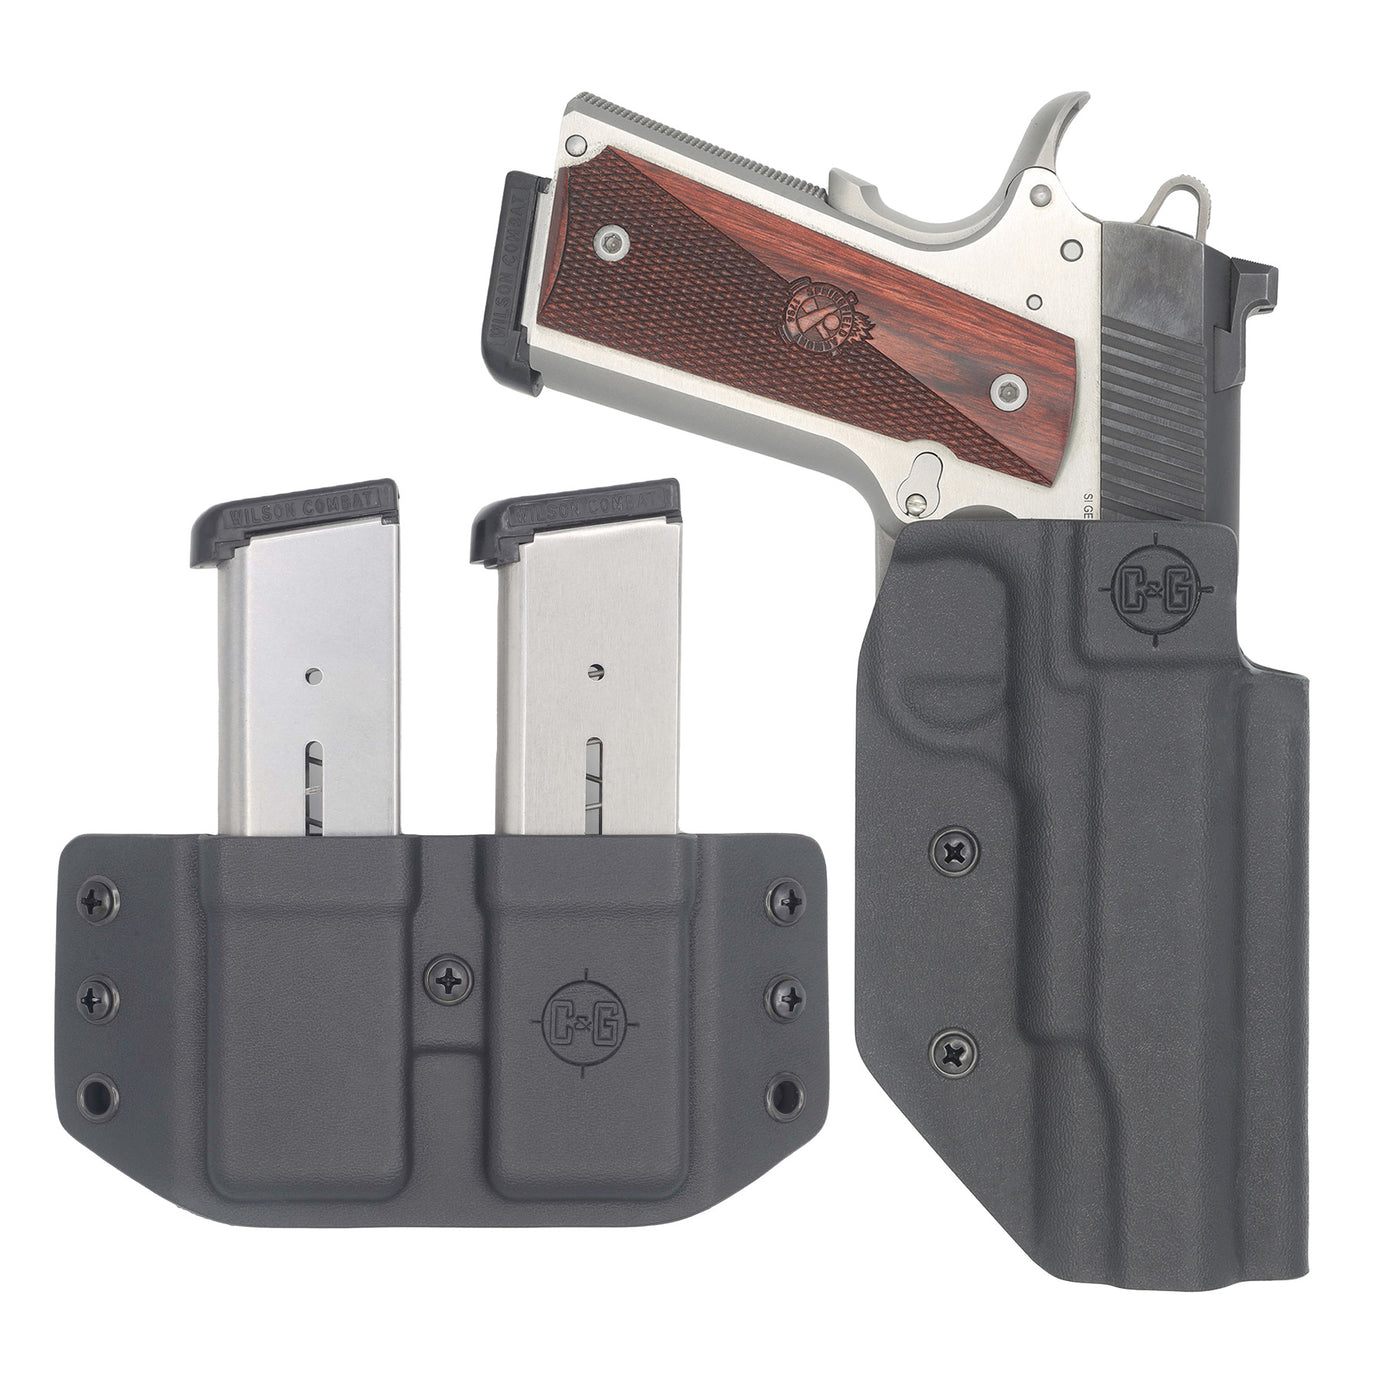 C&G Holsters Competition Starter Kit that is IDPA, USPSA & 3-GUN legal for 1911 all holstered